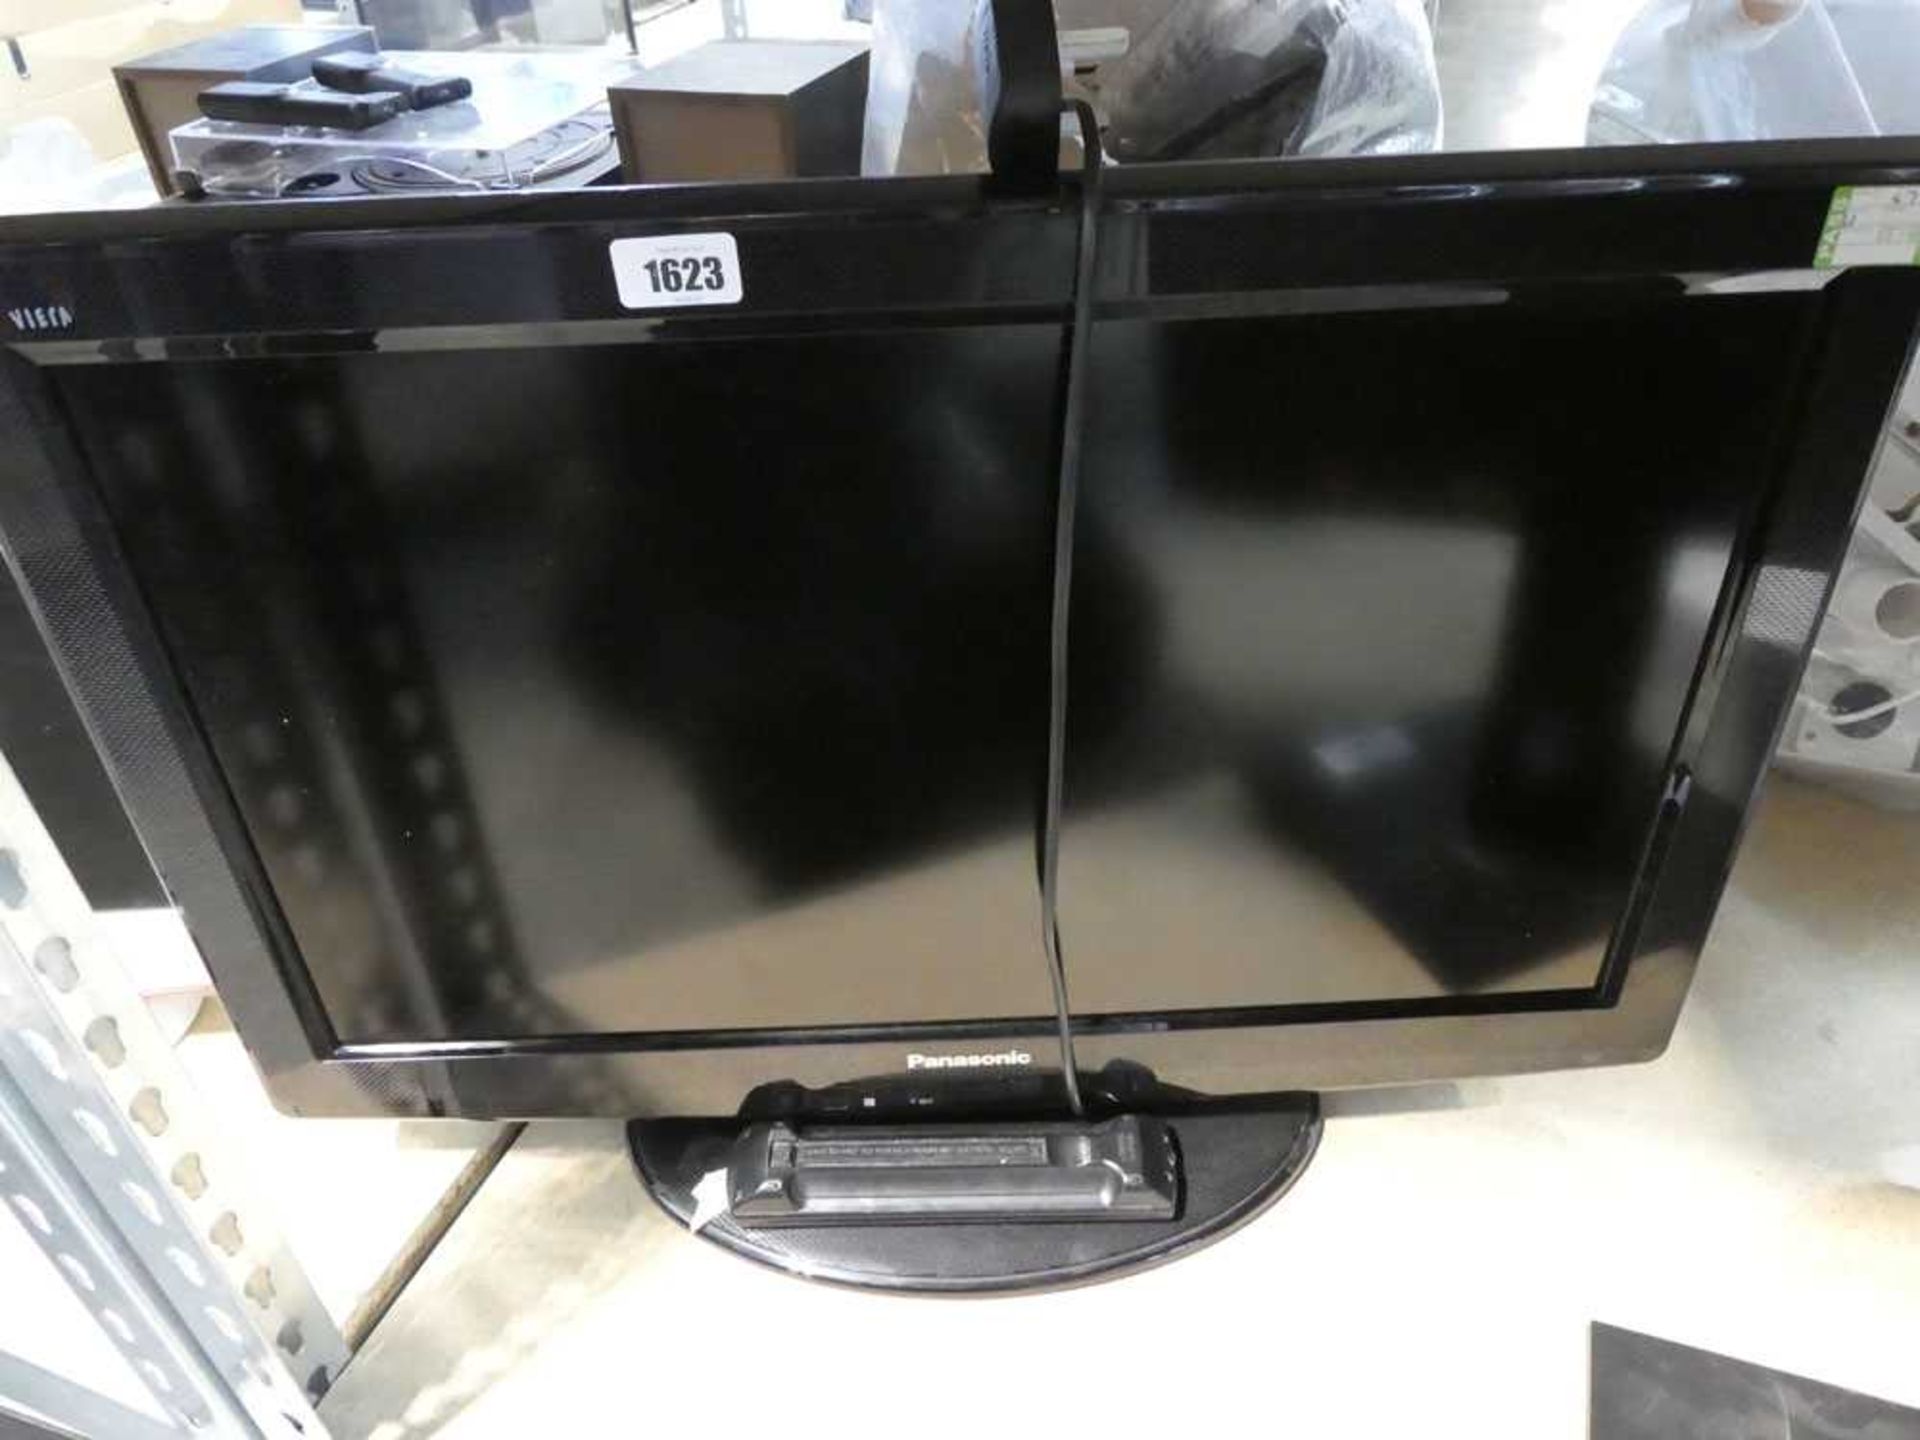 Panasonic 26" TV, with stand and remote control